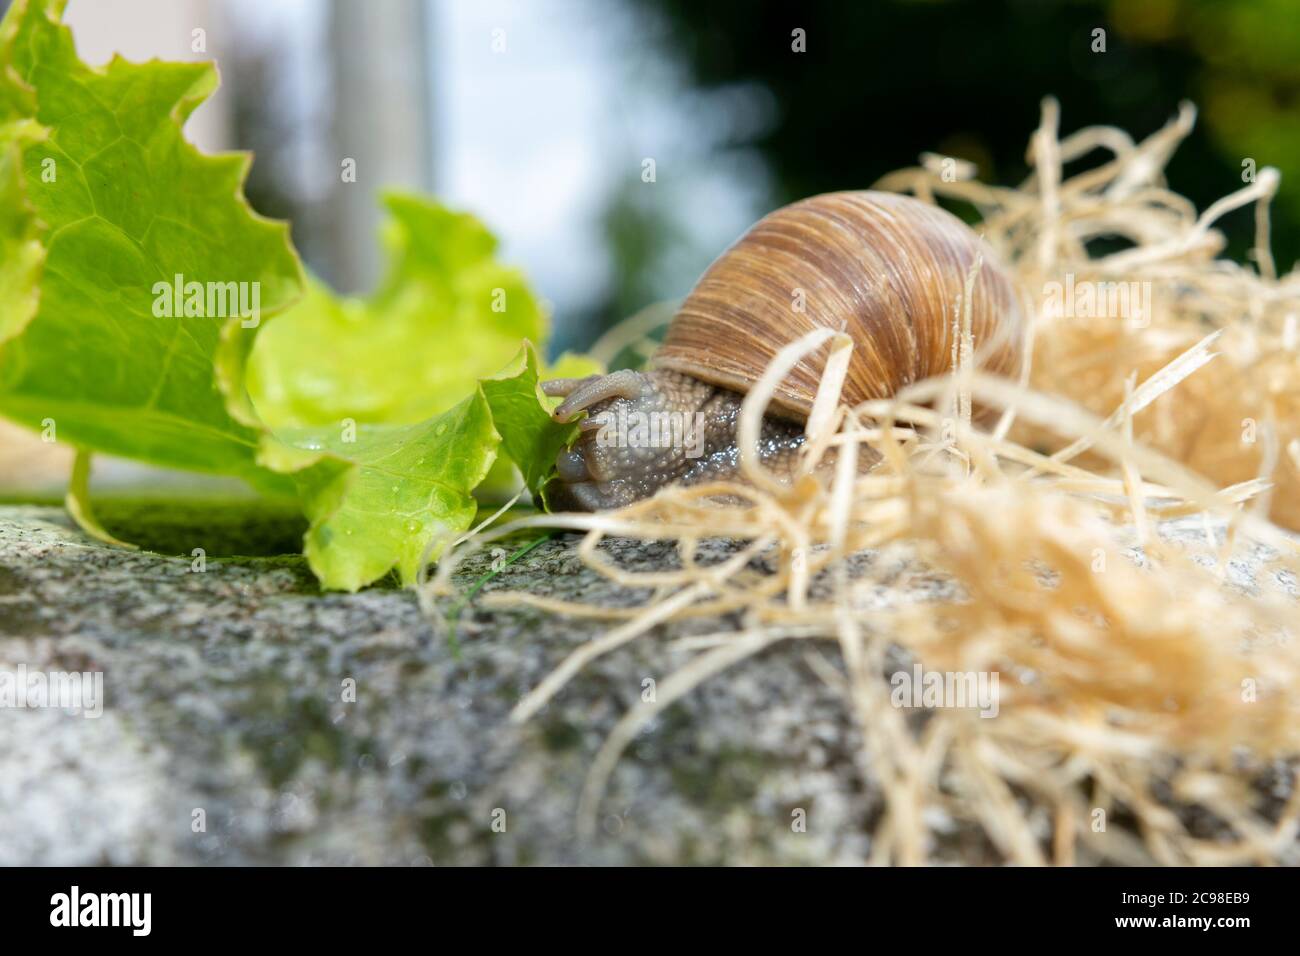 Macro close-up of a Burgundy snail pulling a lettuce leaf with her Radula into her mouth Stock Photo